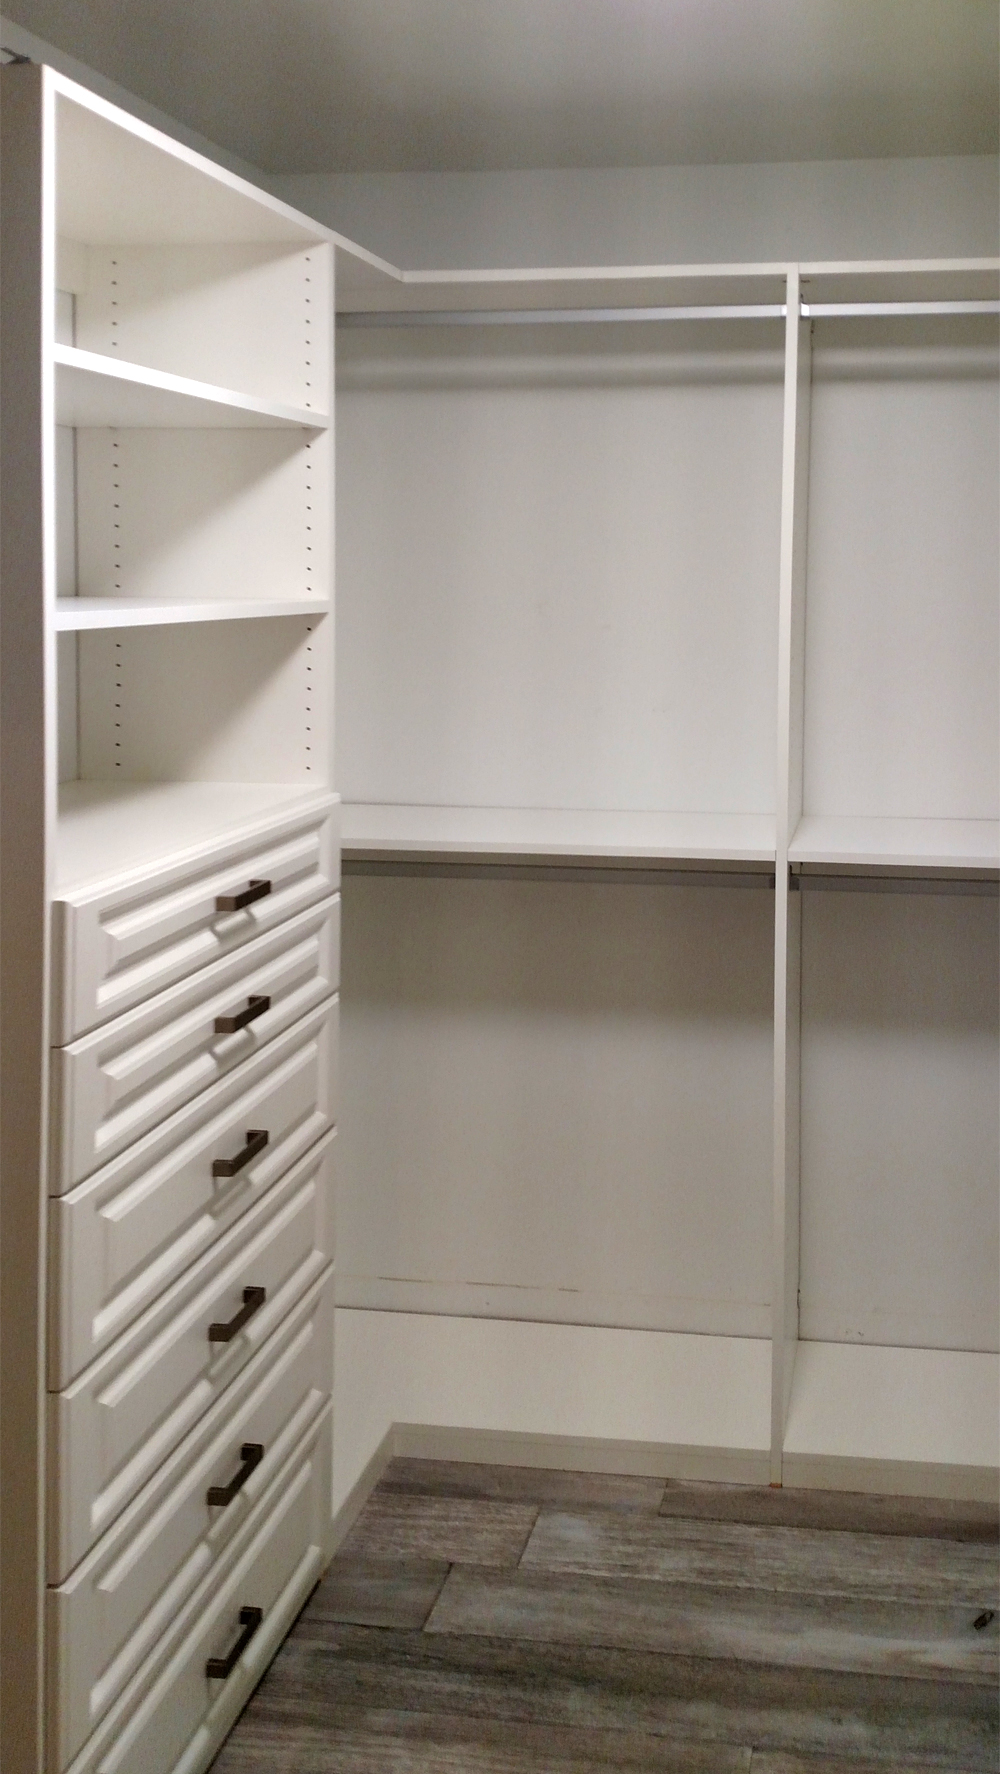 The Closet Works: Pictures of Custom Closets | San Diego